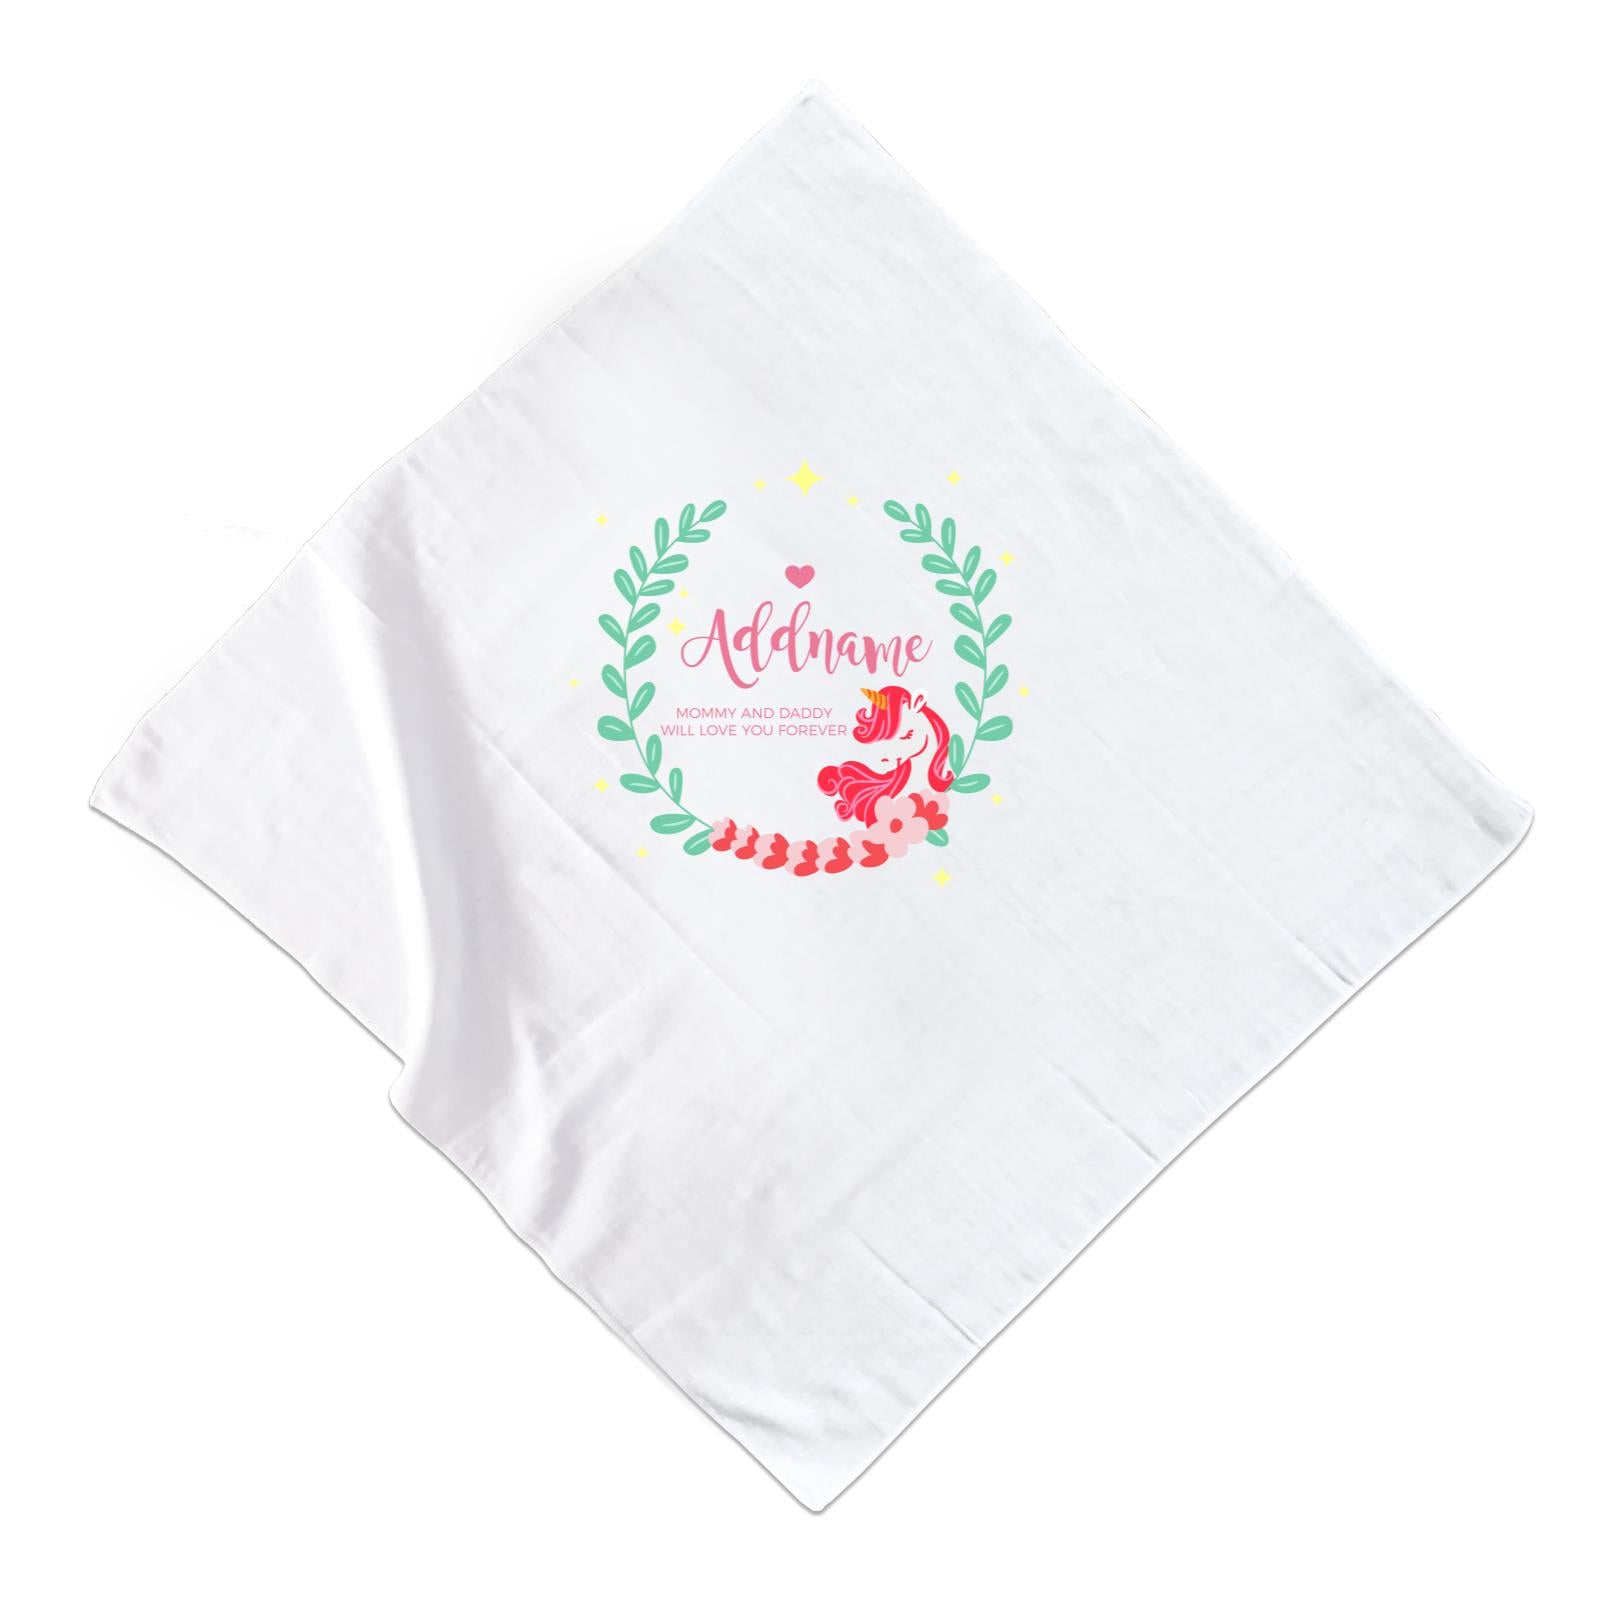 Cute Pink Unicorn with Pastel Green Leaves Wreath Personalizable with Name and Text Muslin Square